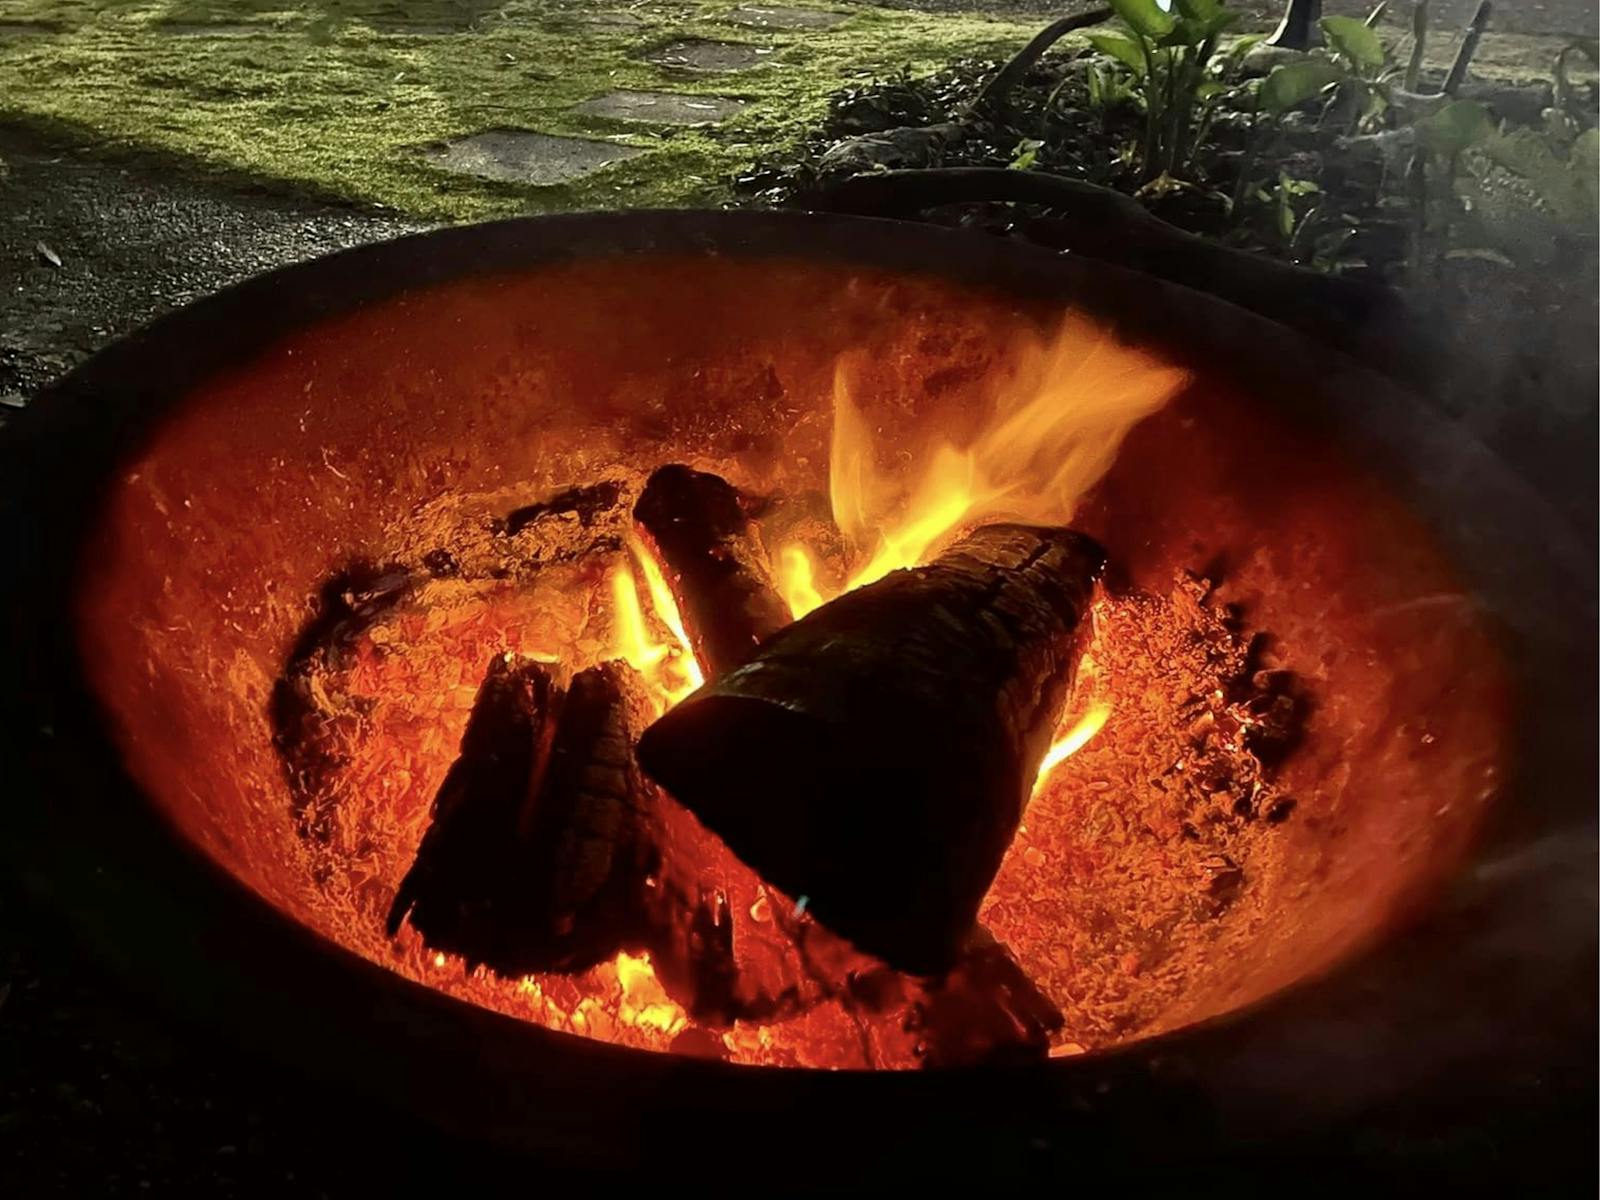 Relax by the one of the fire pots, don't forget the marshmallows!